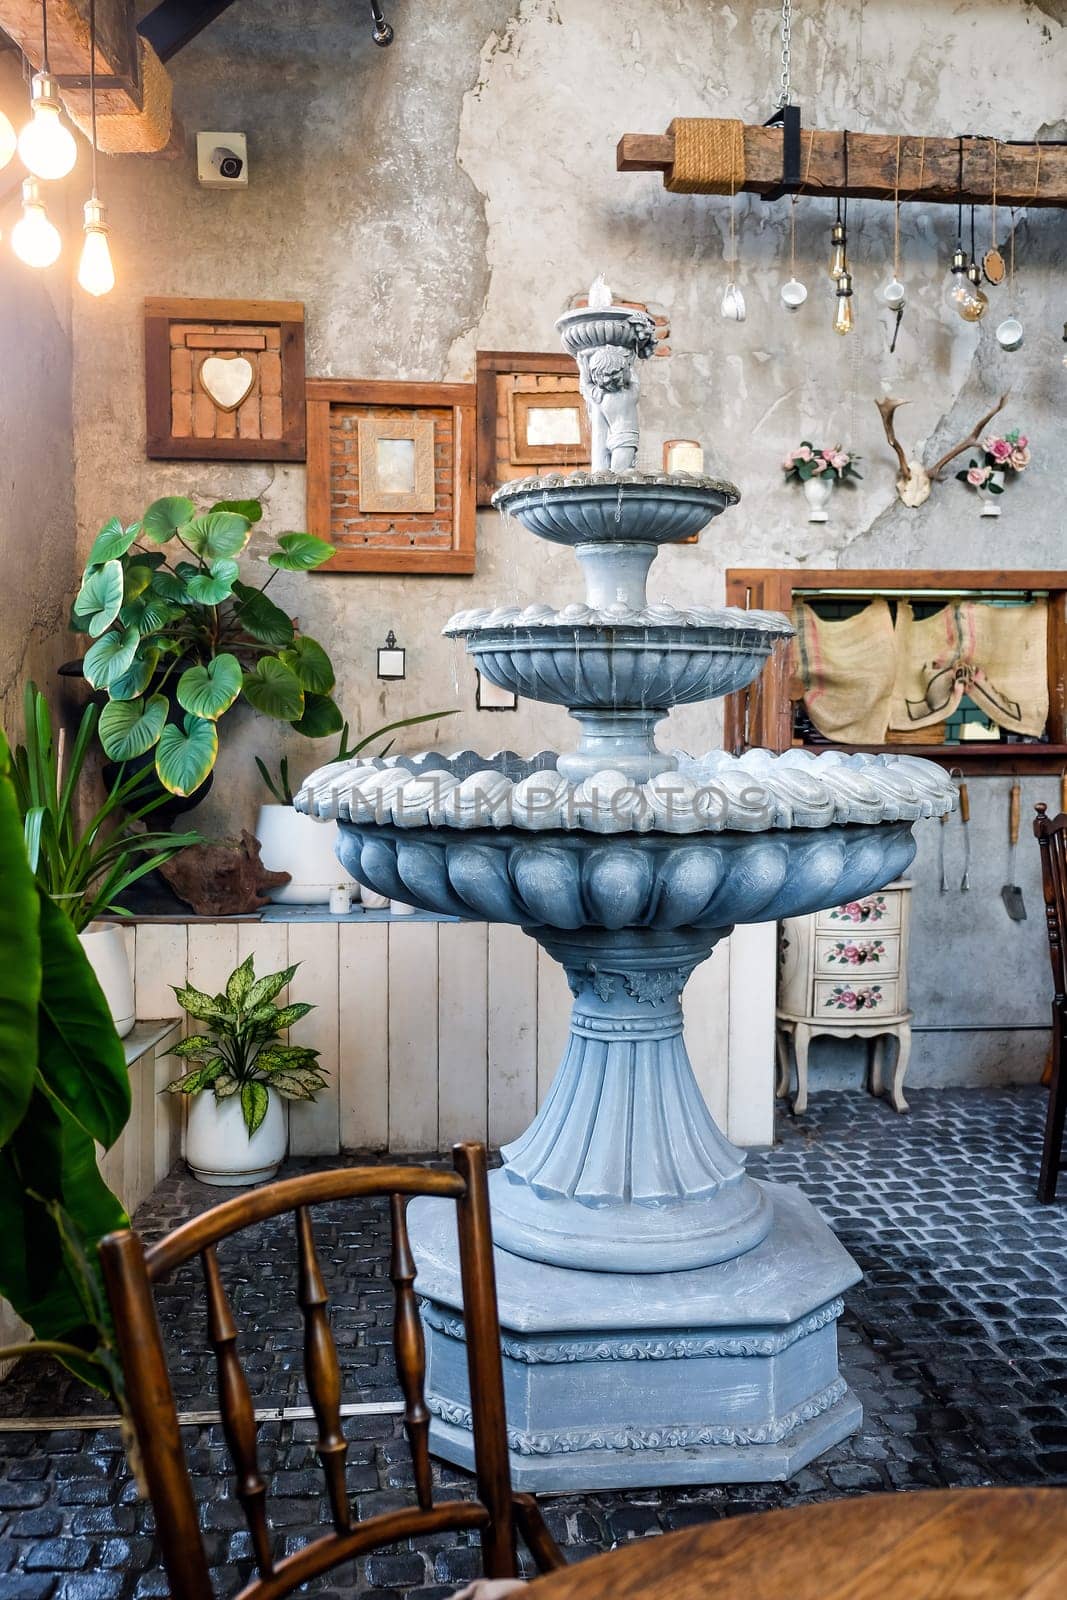 Fountain in the interior of a Vintage Dining Room The concept of rest and relaxation. by ponsulak